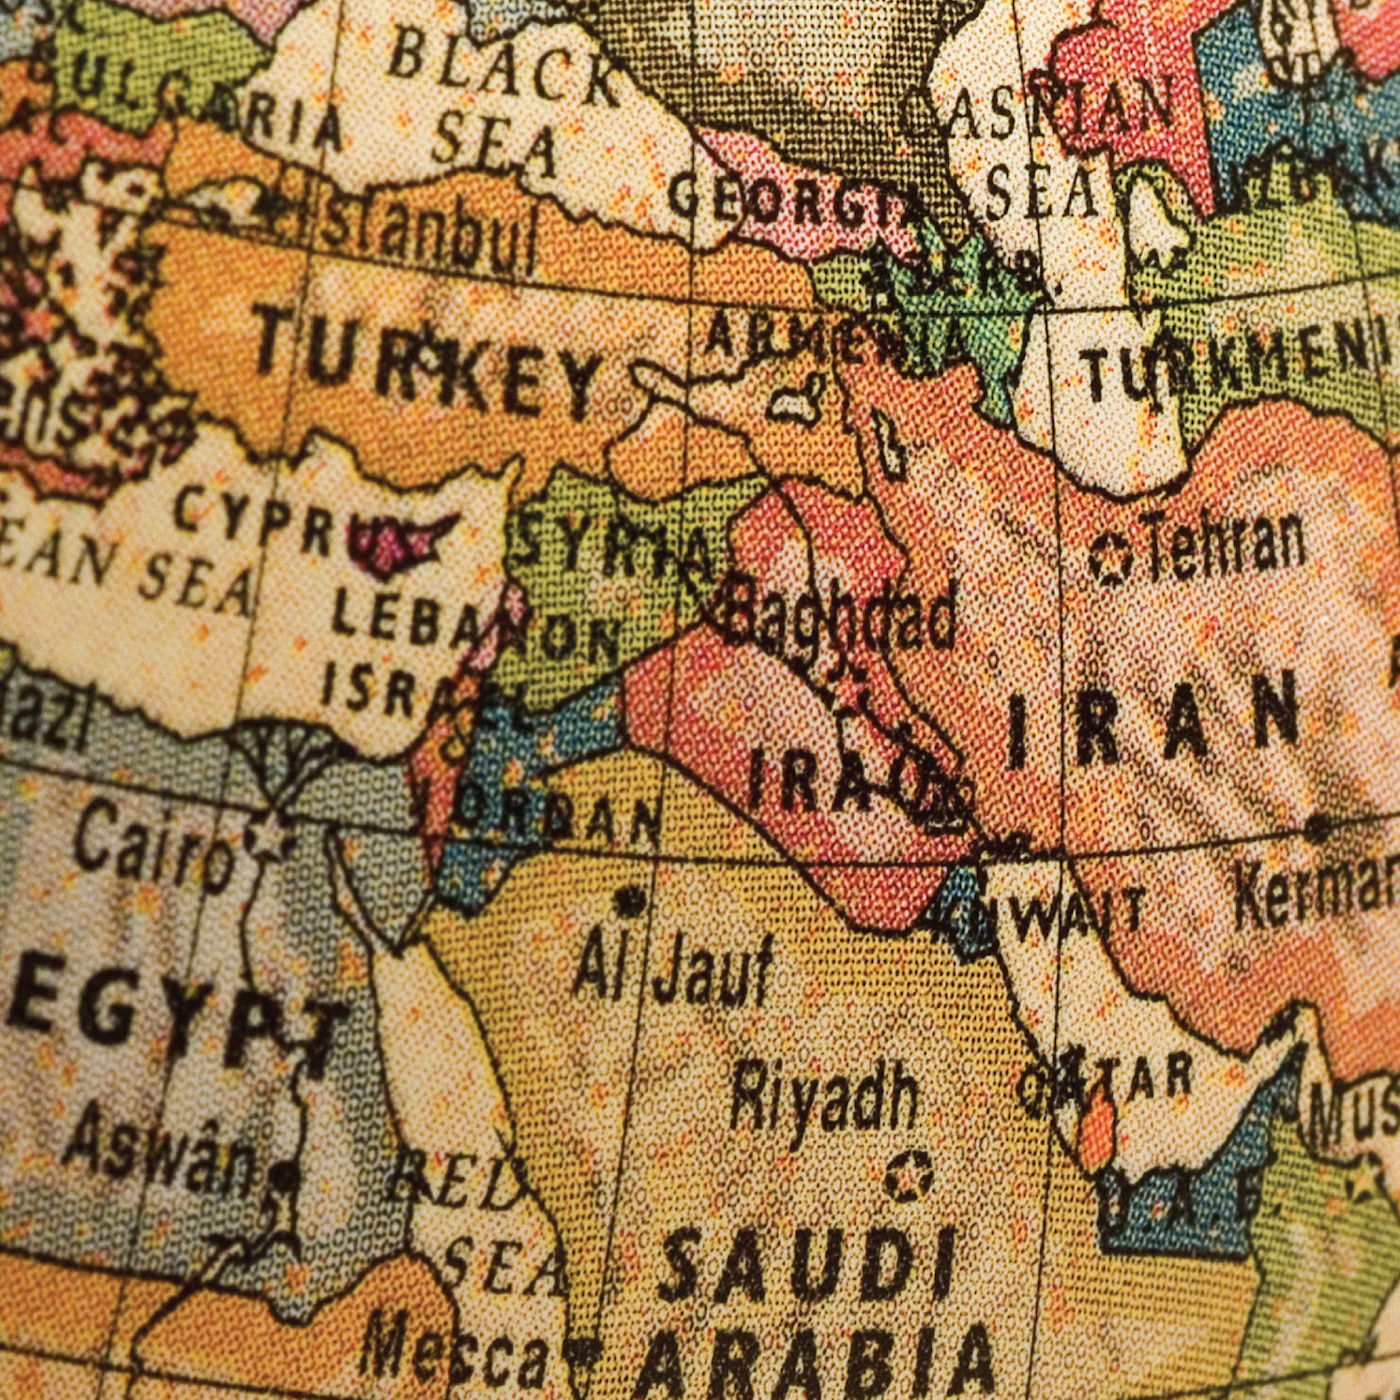 history of the middle east podcast series